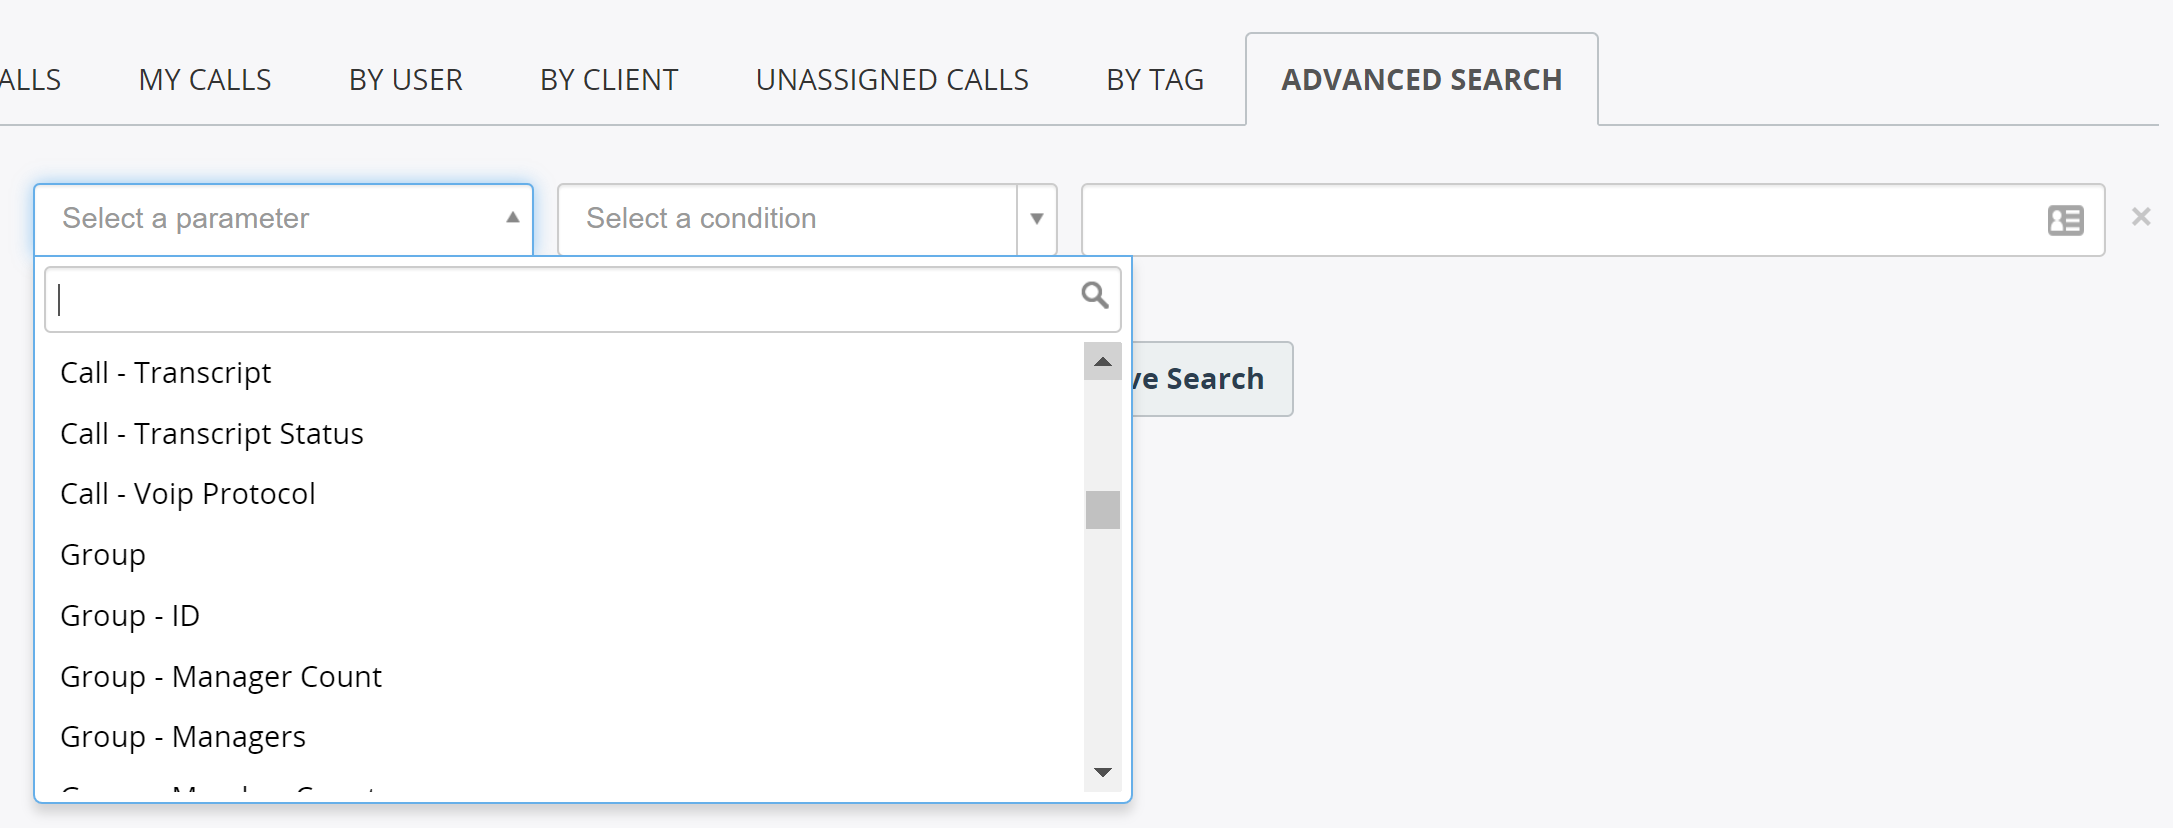 Extend advanced search with all available attributes